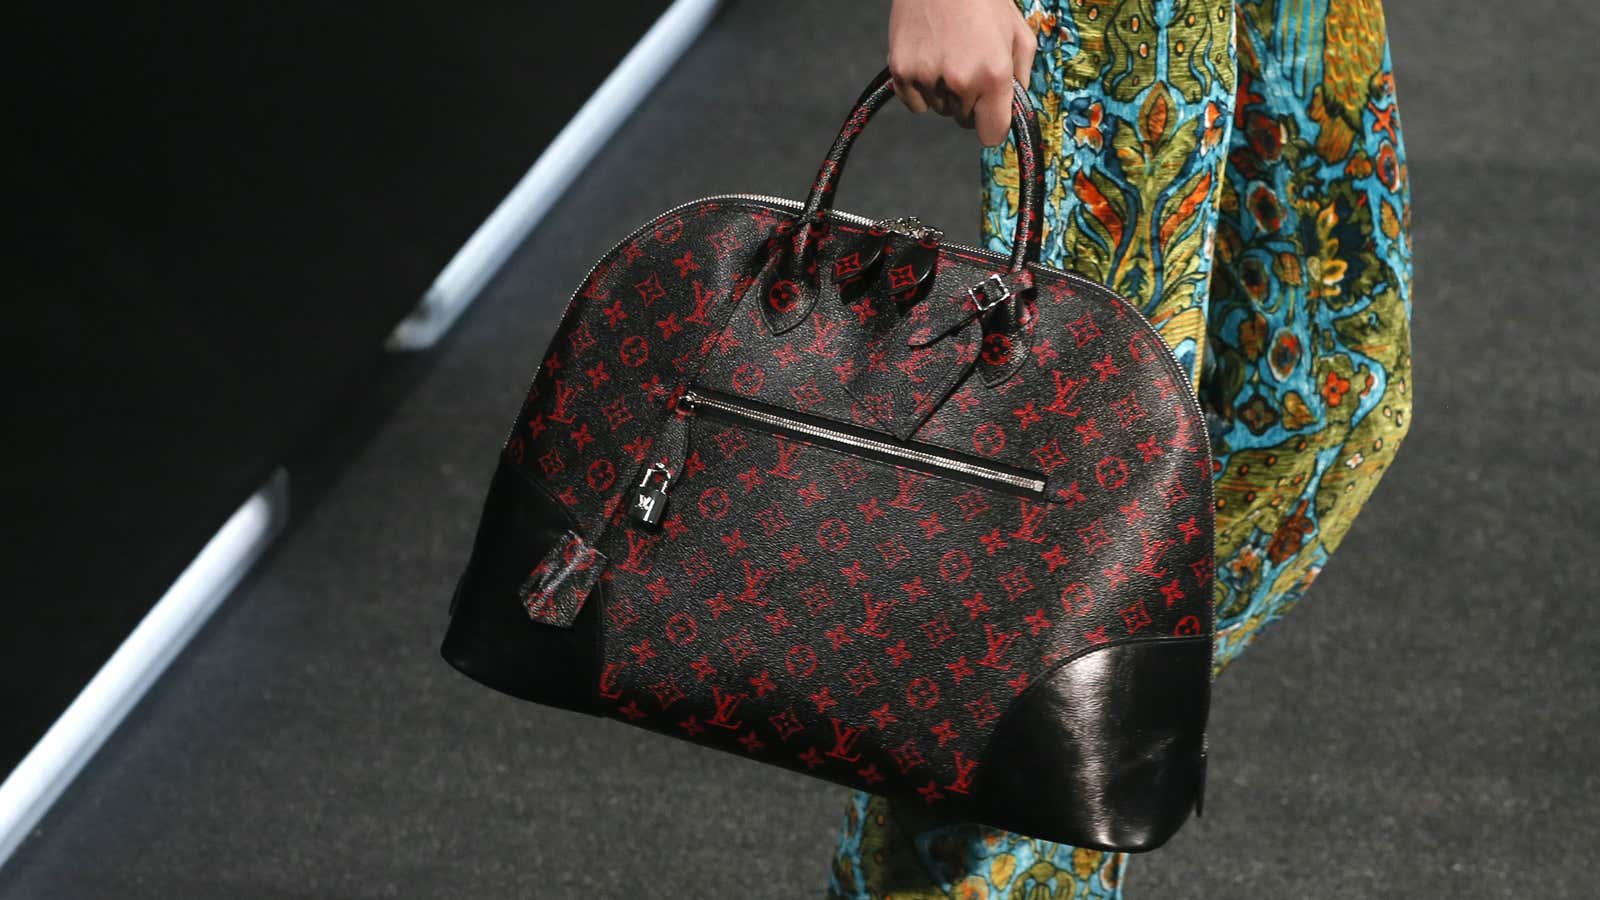 PETA is investing in some Louis Vuitton.